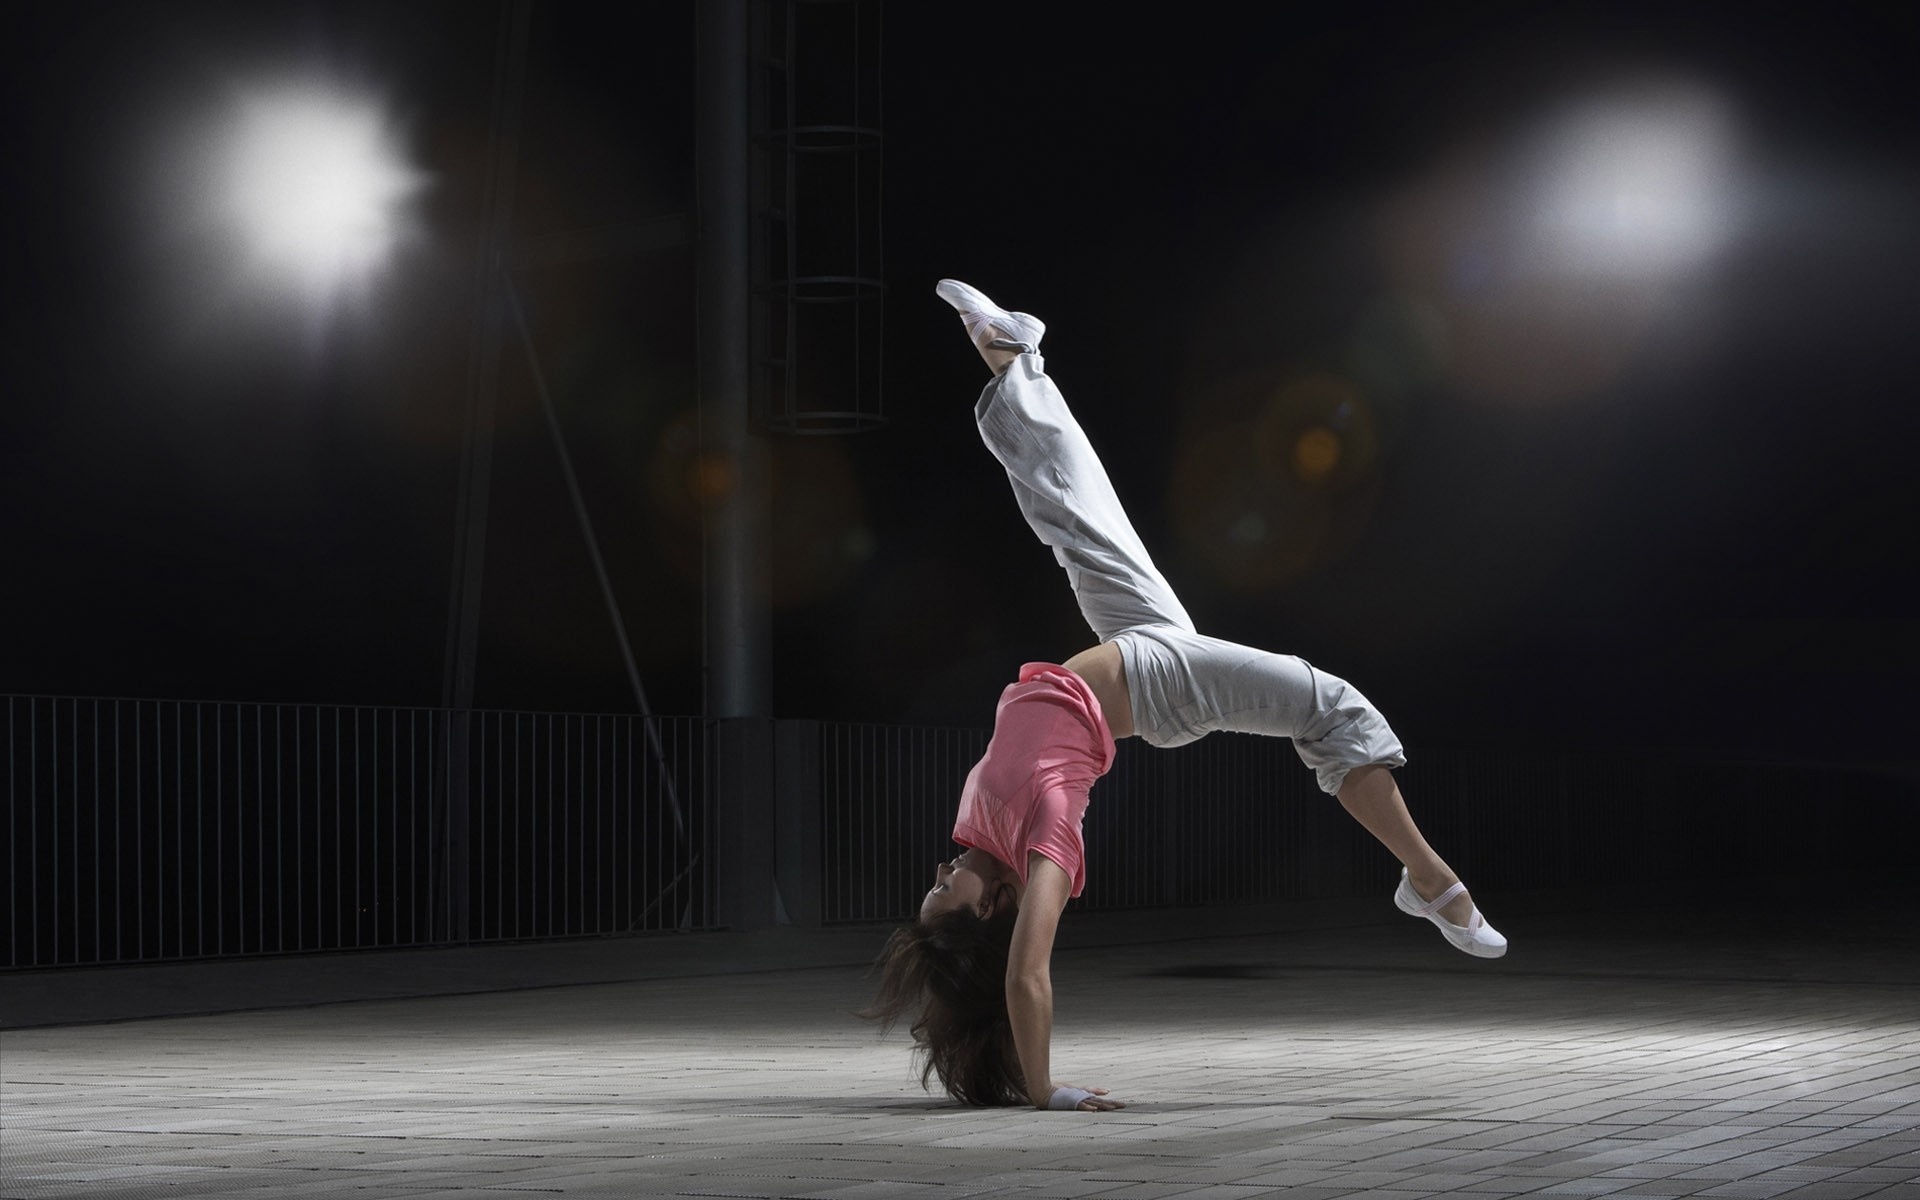 Acrobatic Sports: Balance training, Stretching, Flexibility exercise, Handstand. 1920x1200 HD Background.